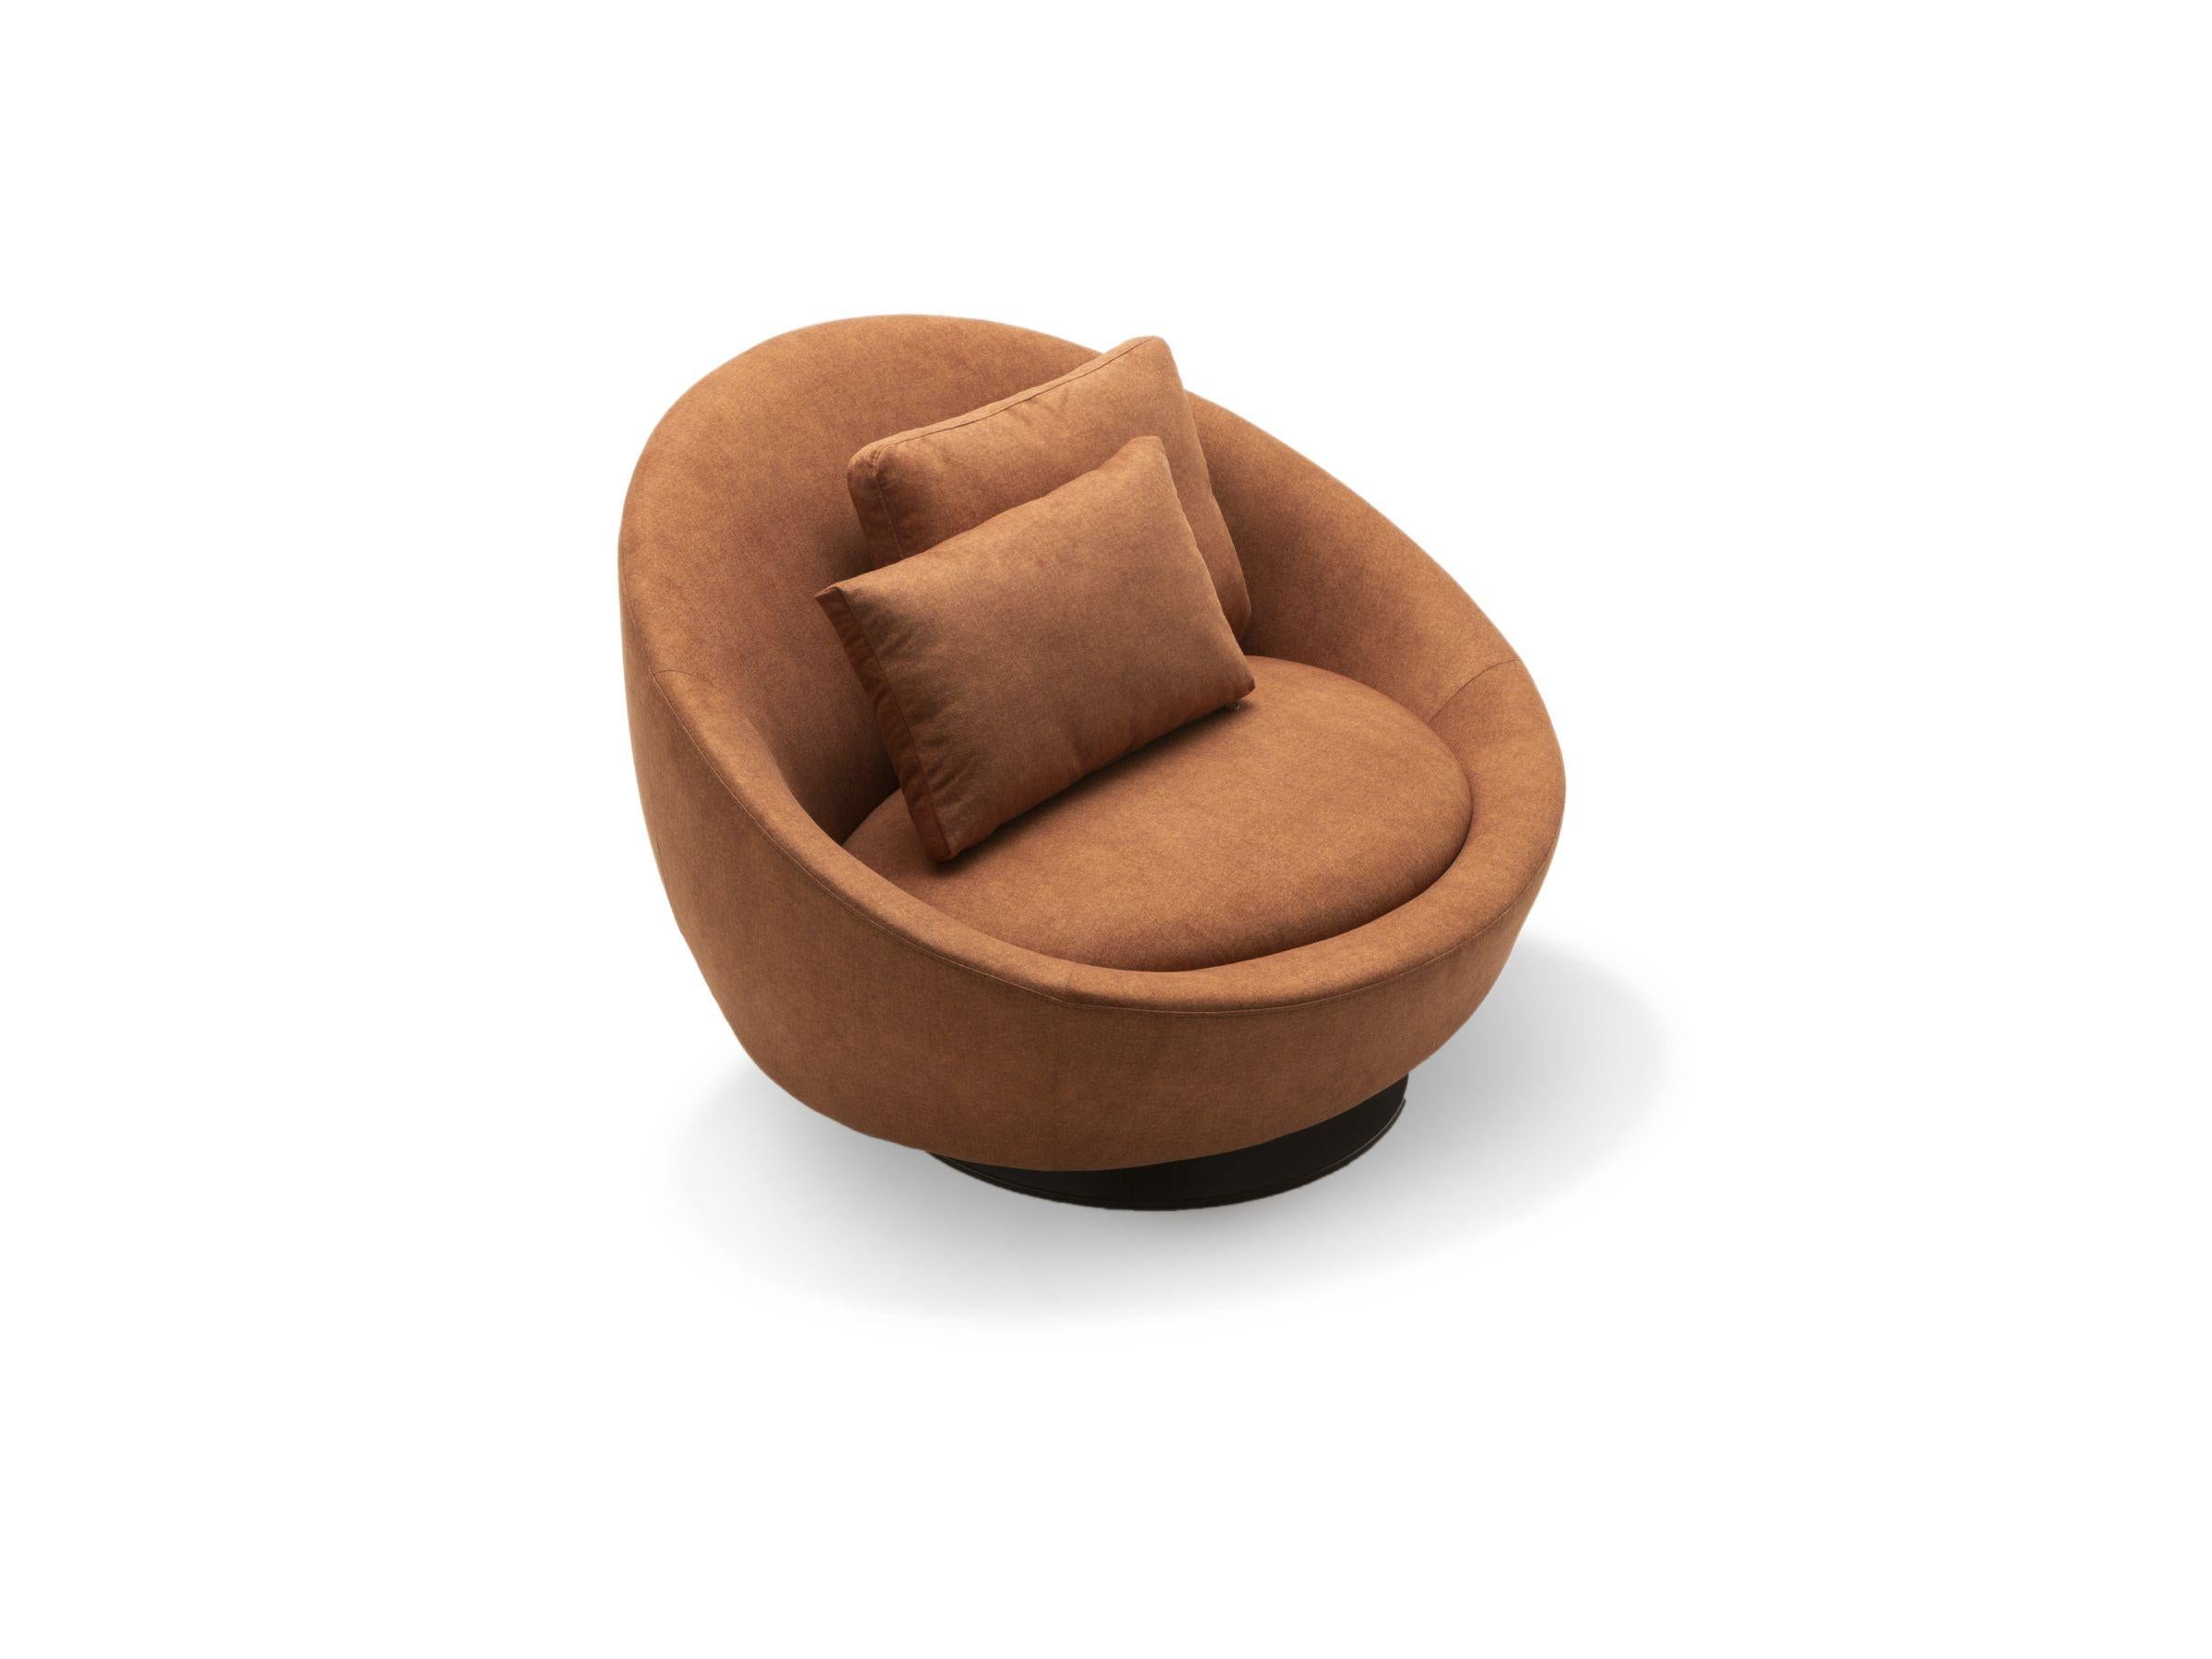 Arte Armchair's rounded lines will enrich the contemporary design while delivering the ultimate comfort. With its wide and cozy seating for two people and its functional, rotatable legs, Arte Armchair will be a great addition to your